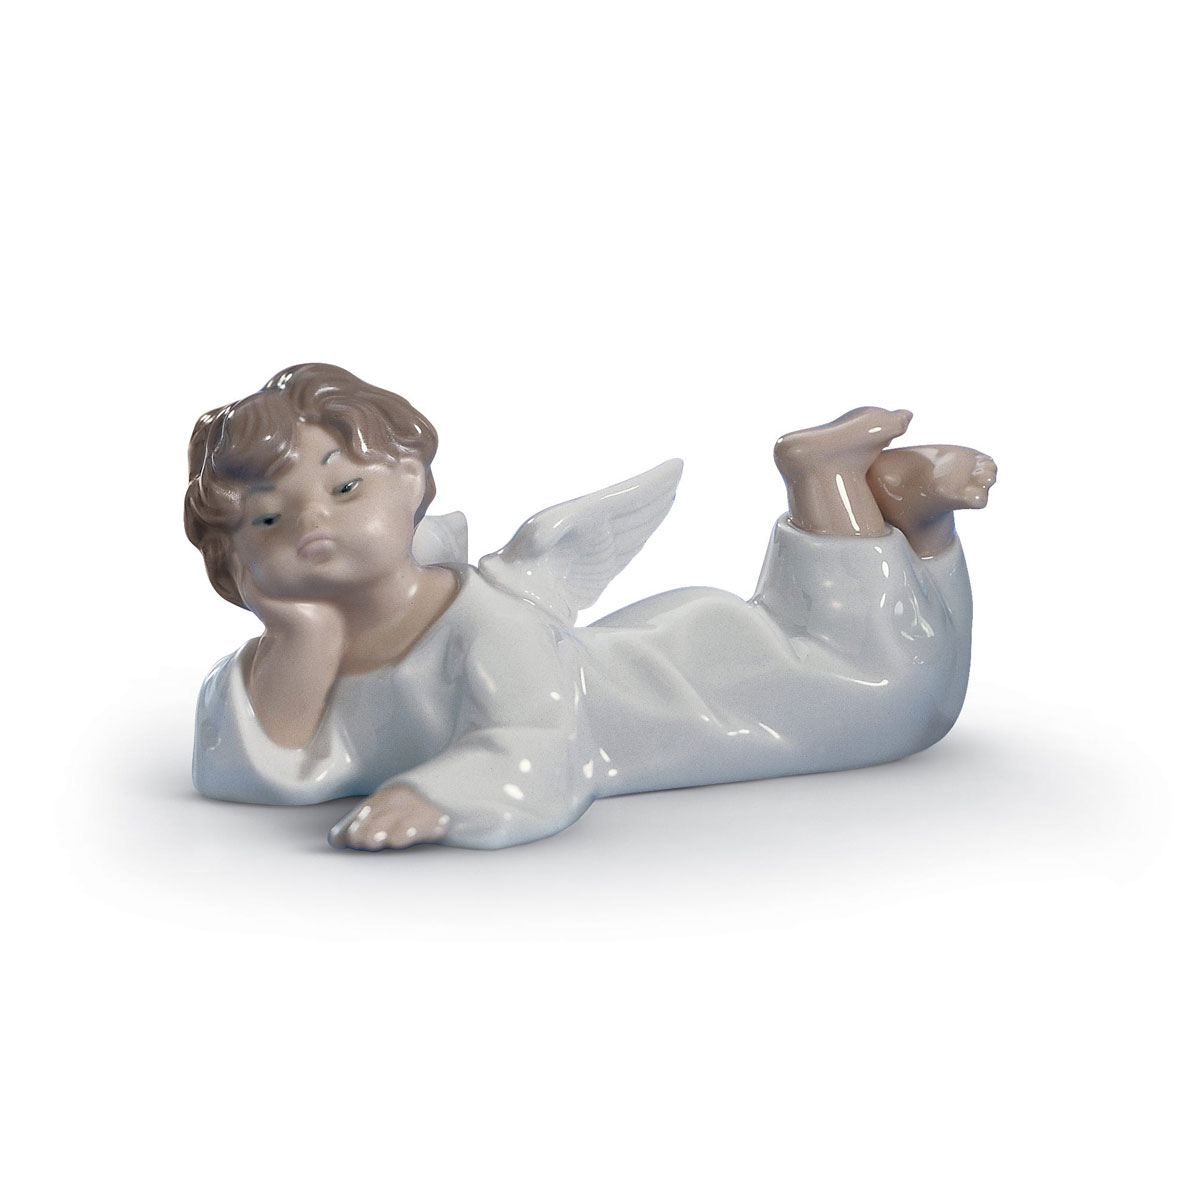 Lladro Classic Sculpture, Angel Laying Down Figurine